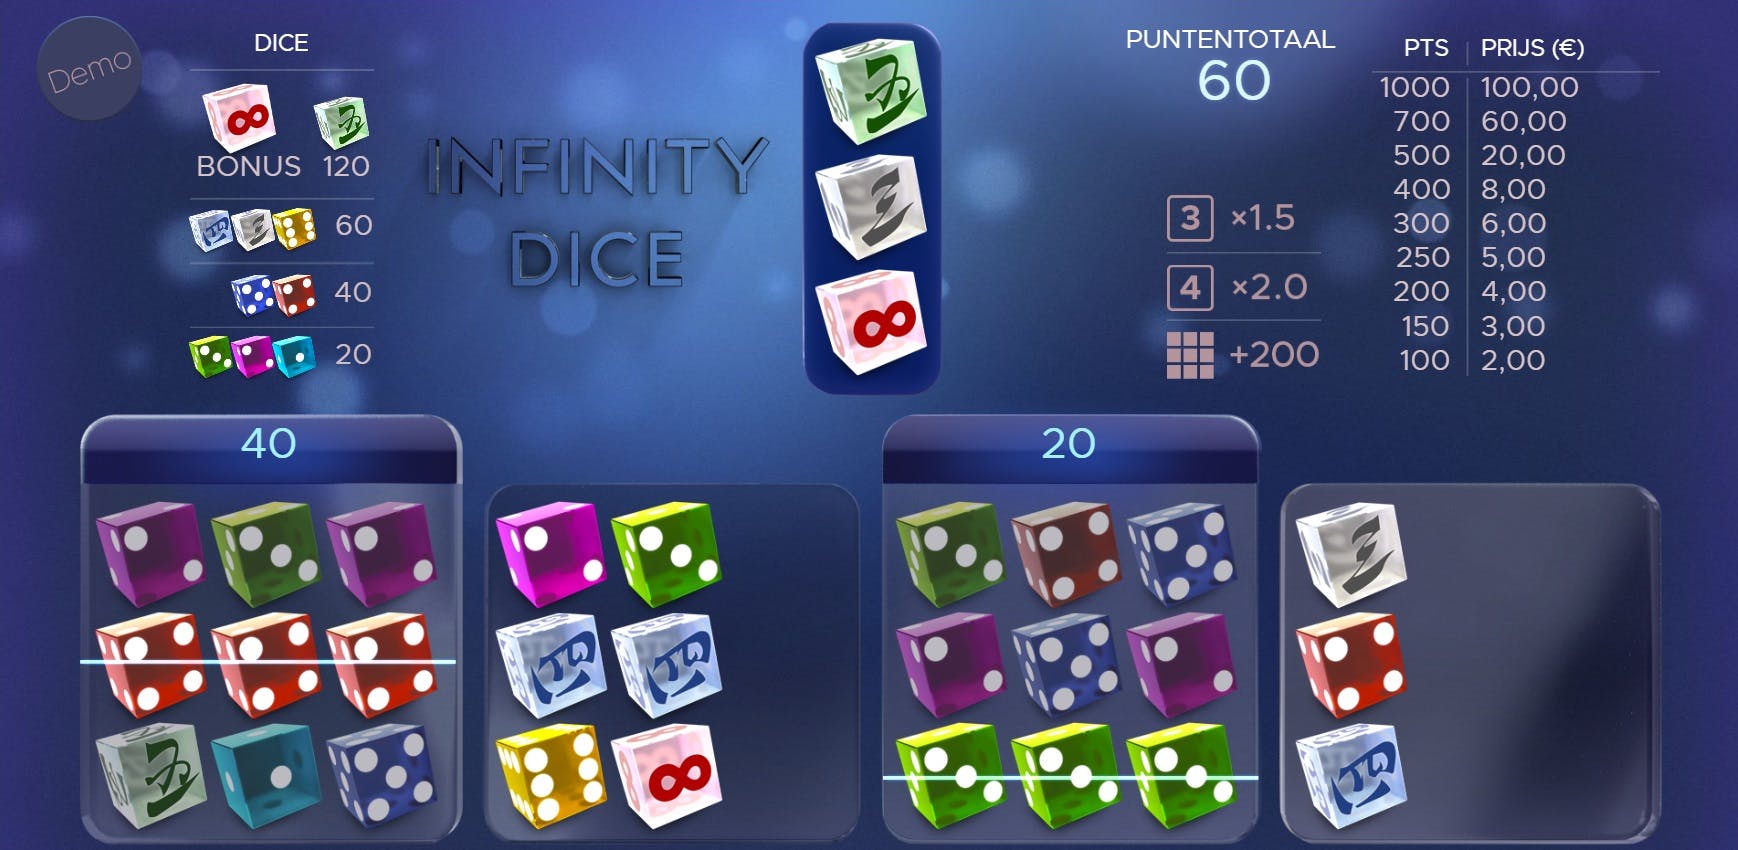 Airdice Infinity Dice Game - Test, tips and tricks